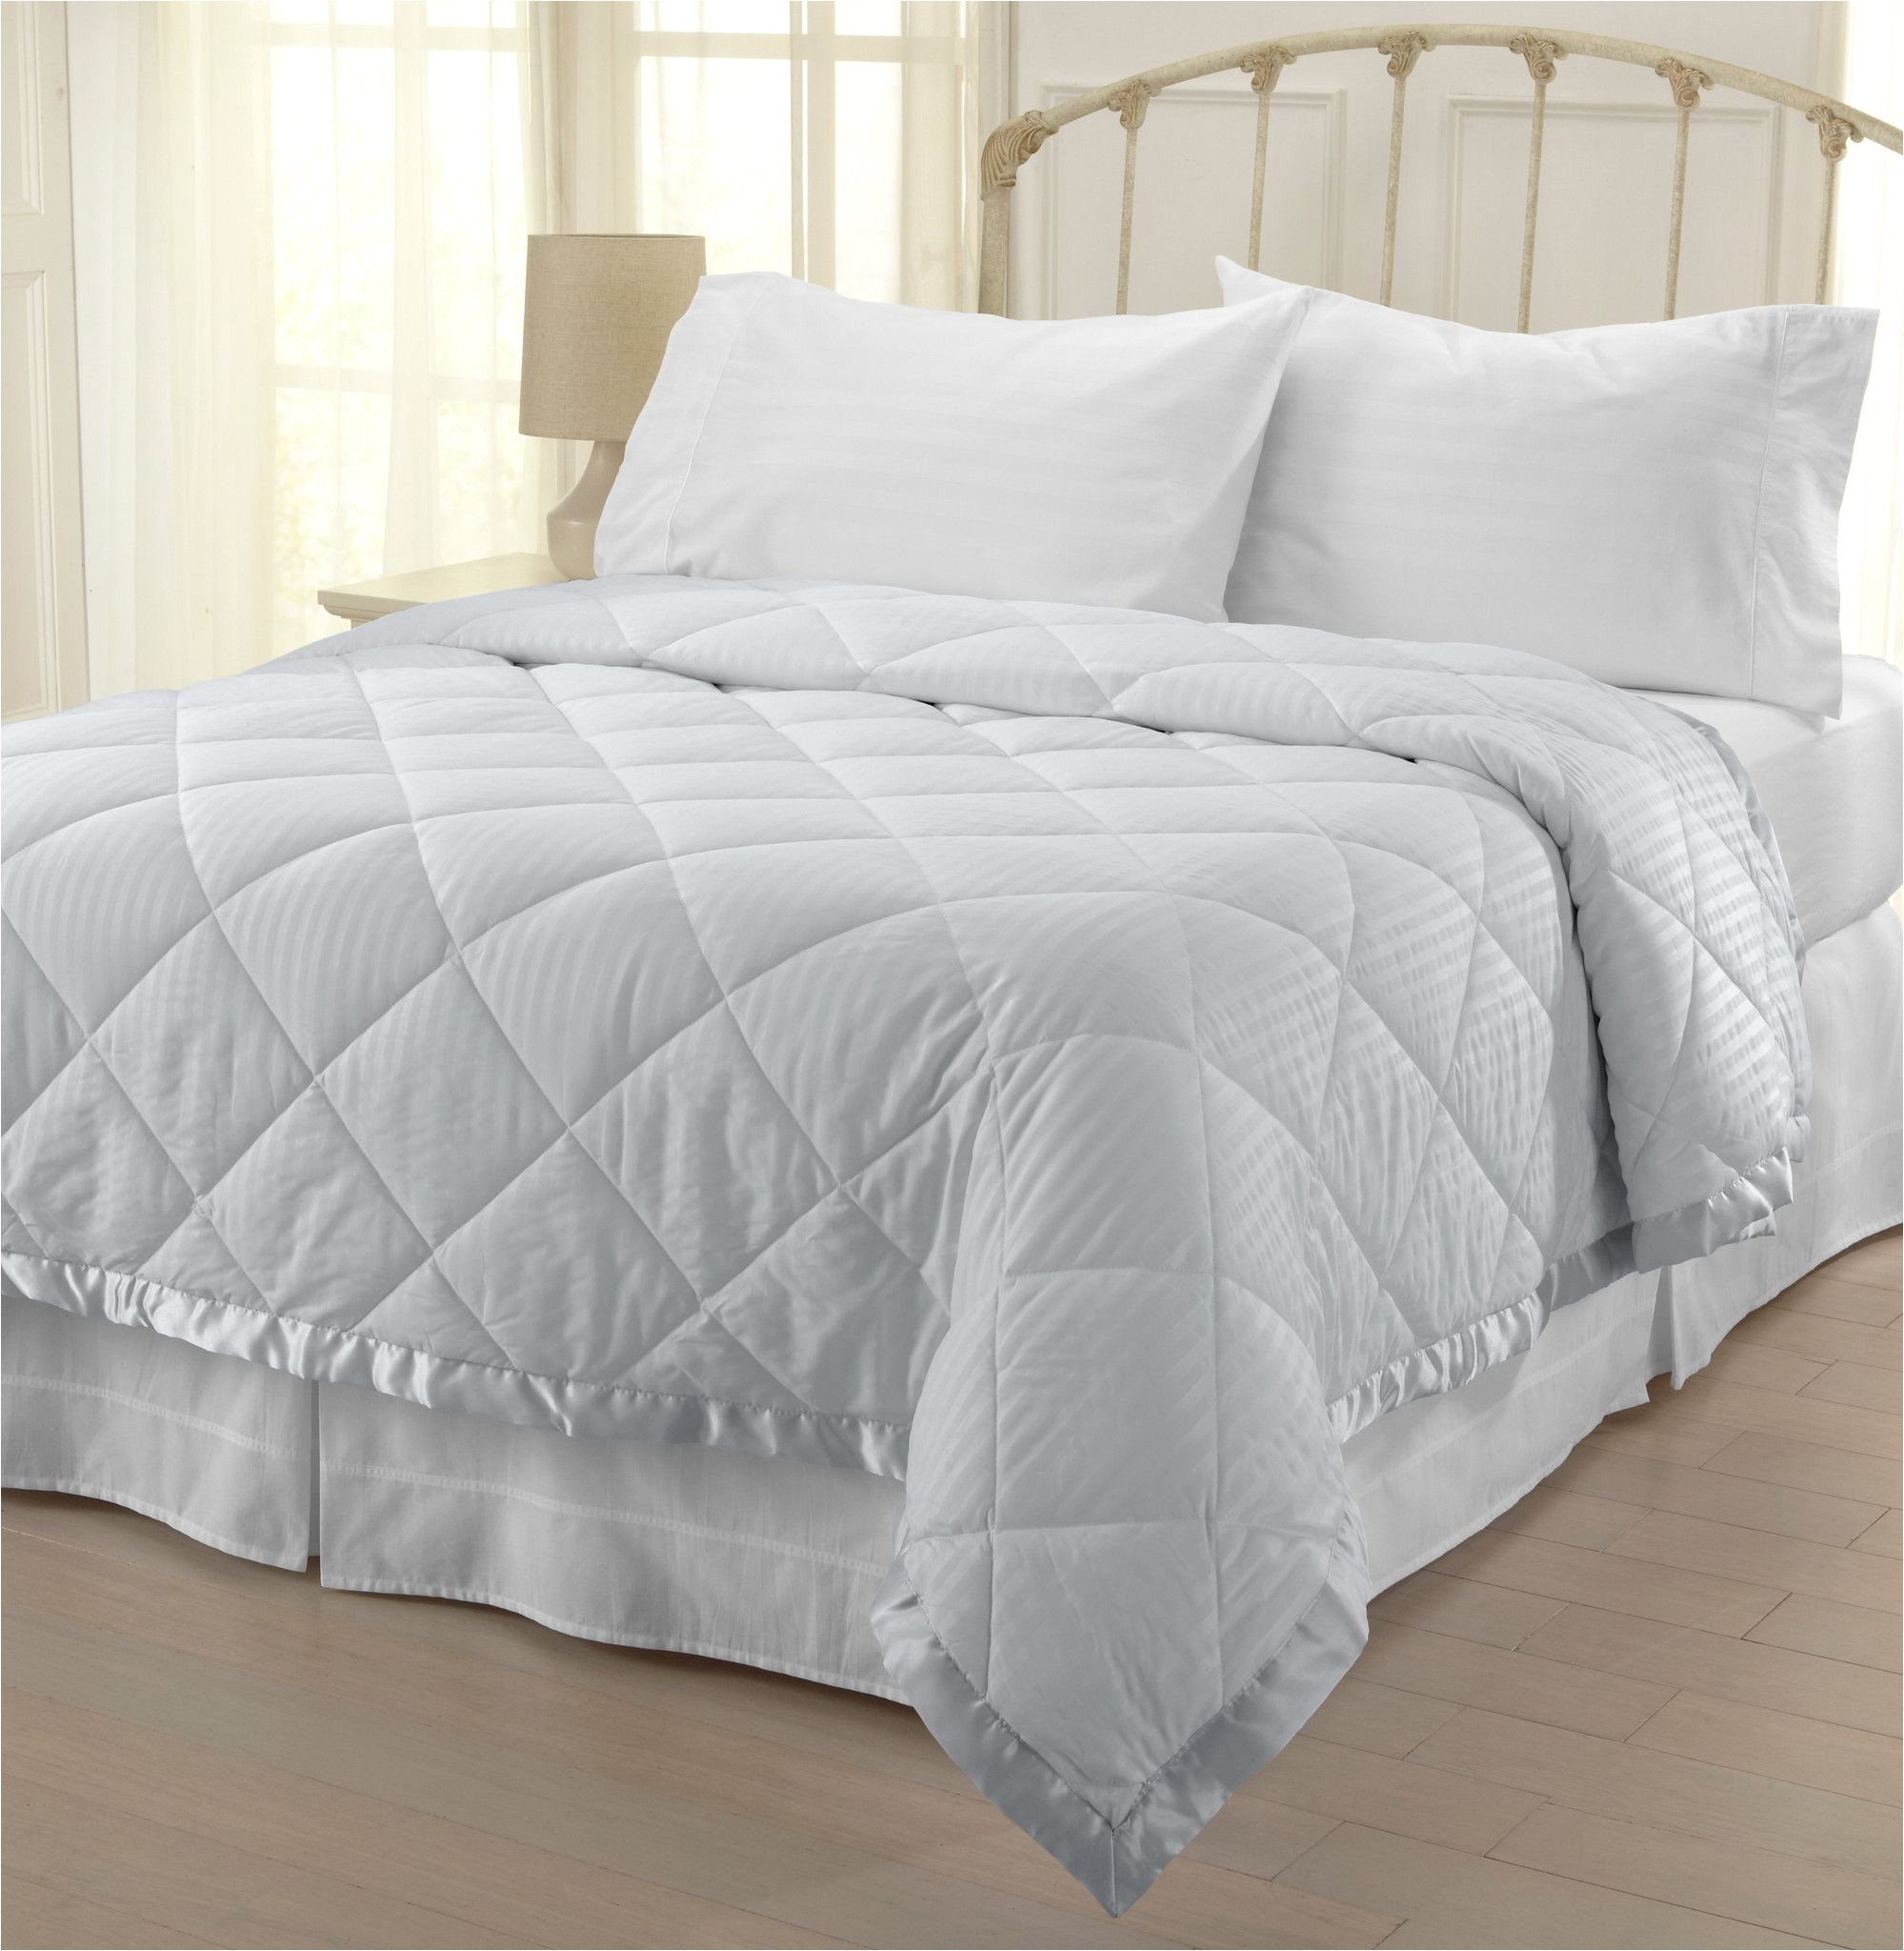 Difference Between Down and Down Alternative Comforter We Understand People with Allergies are Often Uncomfortable that S